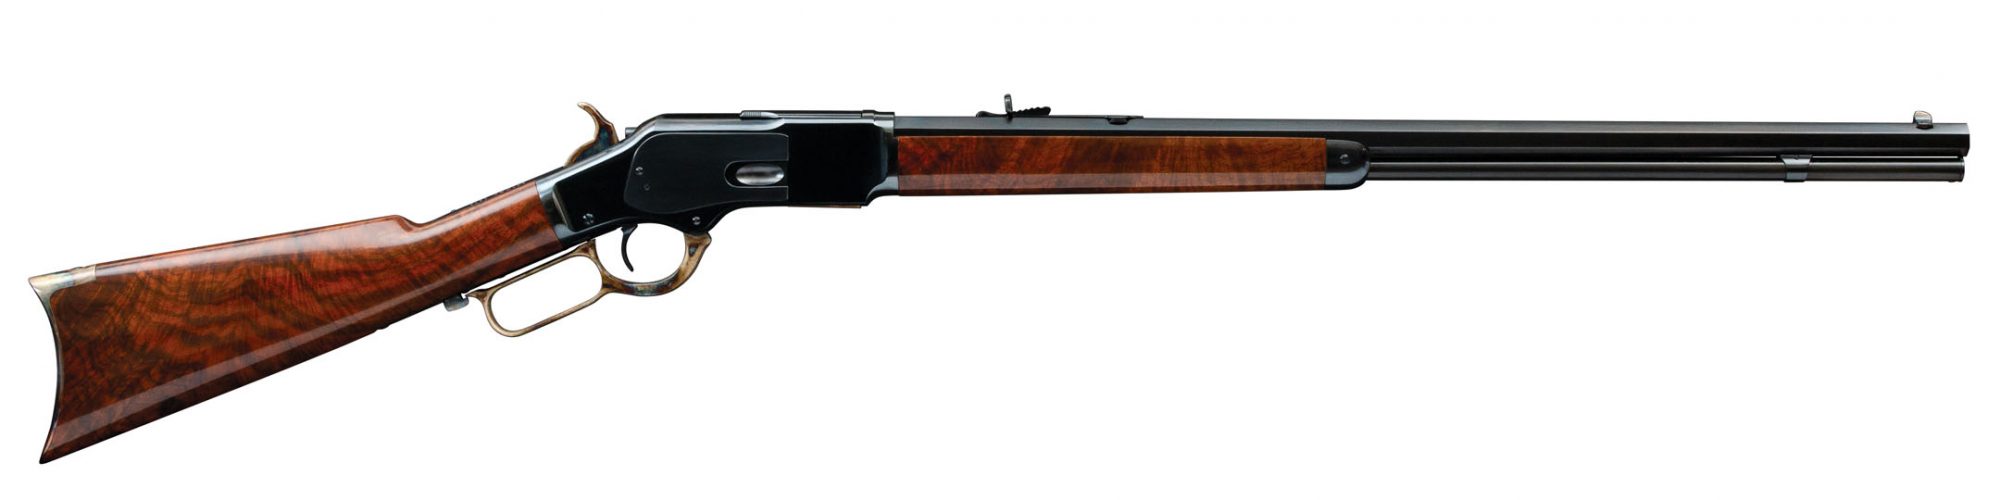 Winchester Model 1873 from 1904, after restoration work by Turnbull Restoration Co.